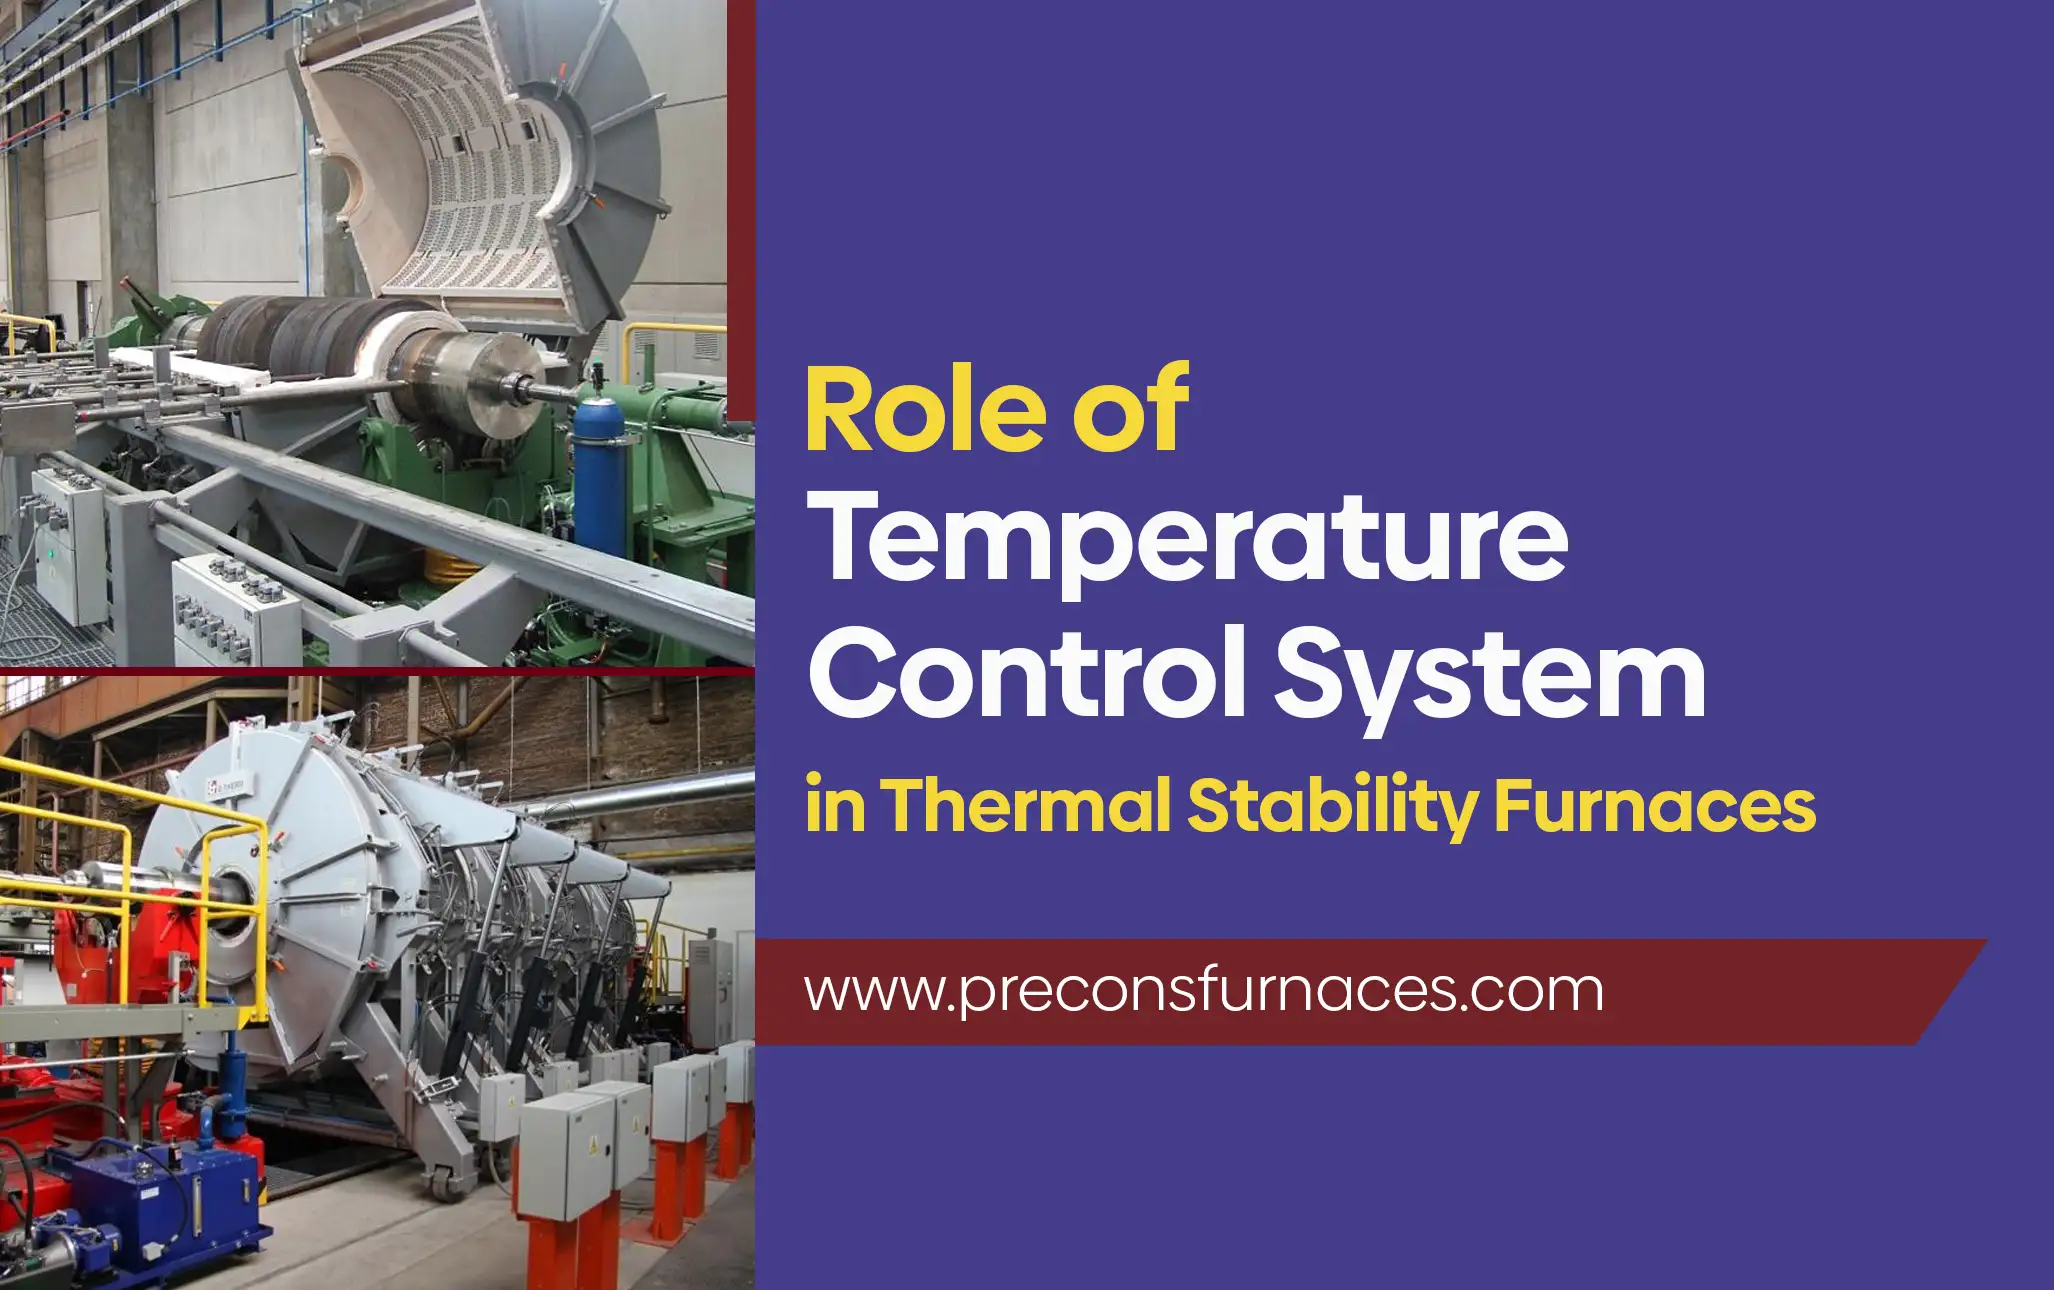 Thermal Stability Furnaces